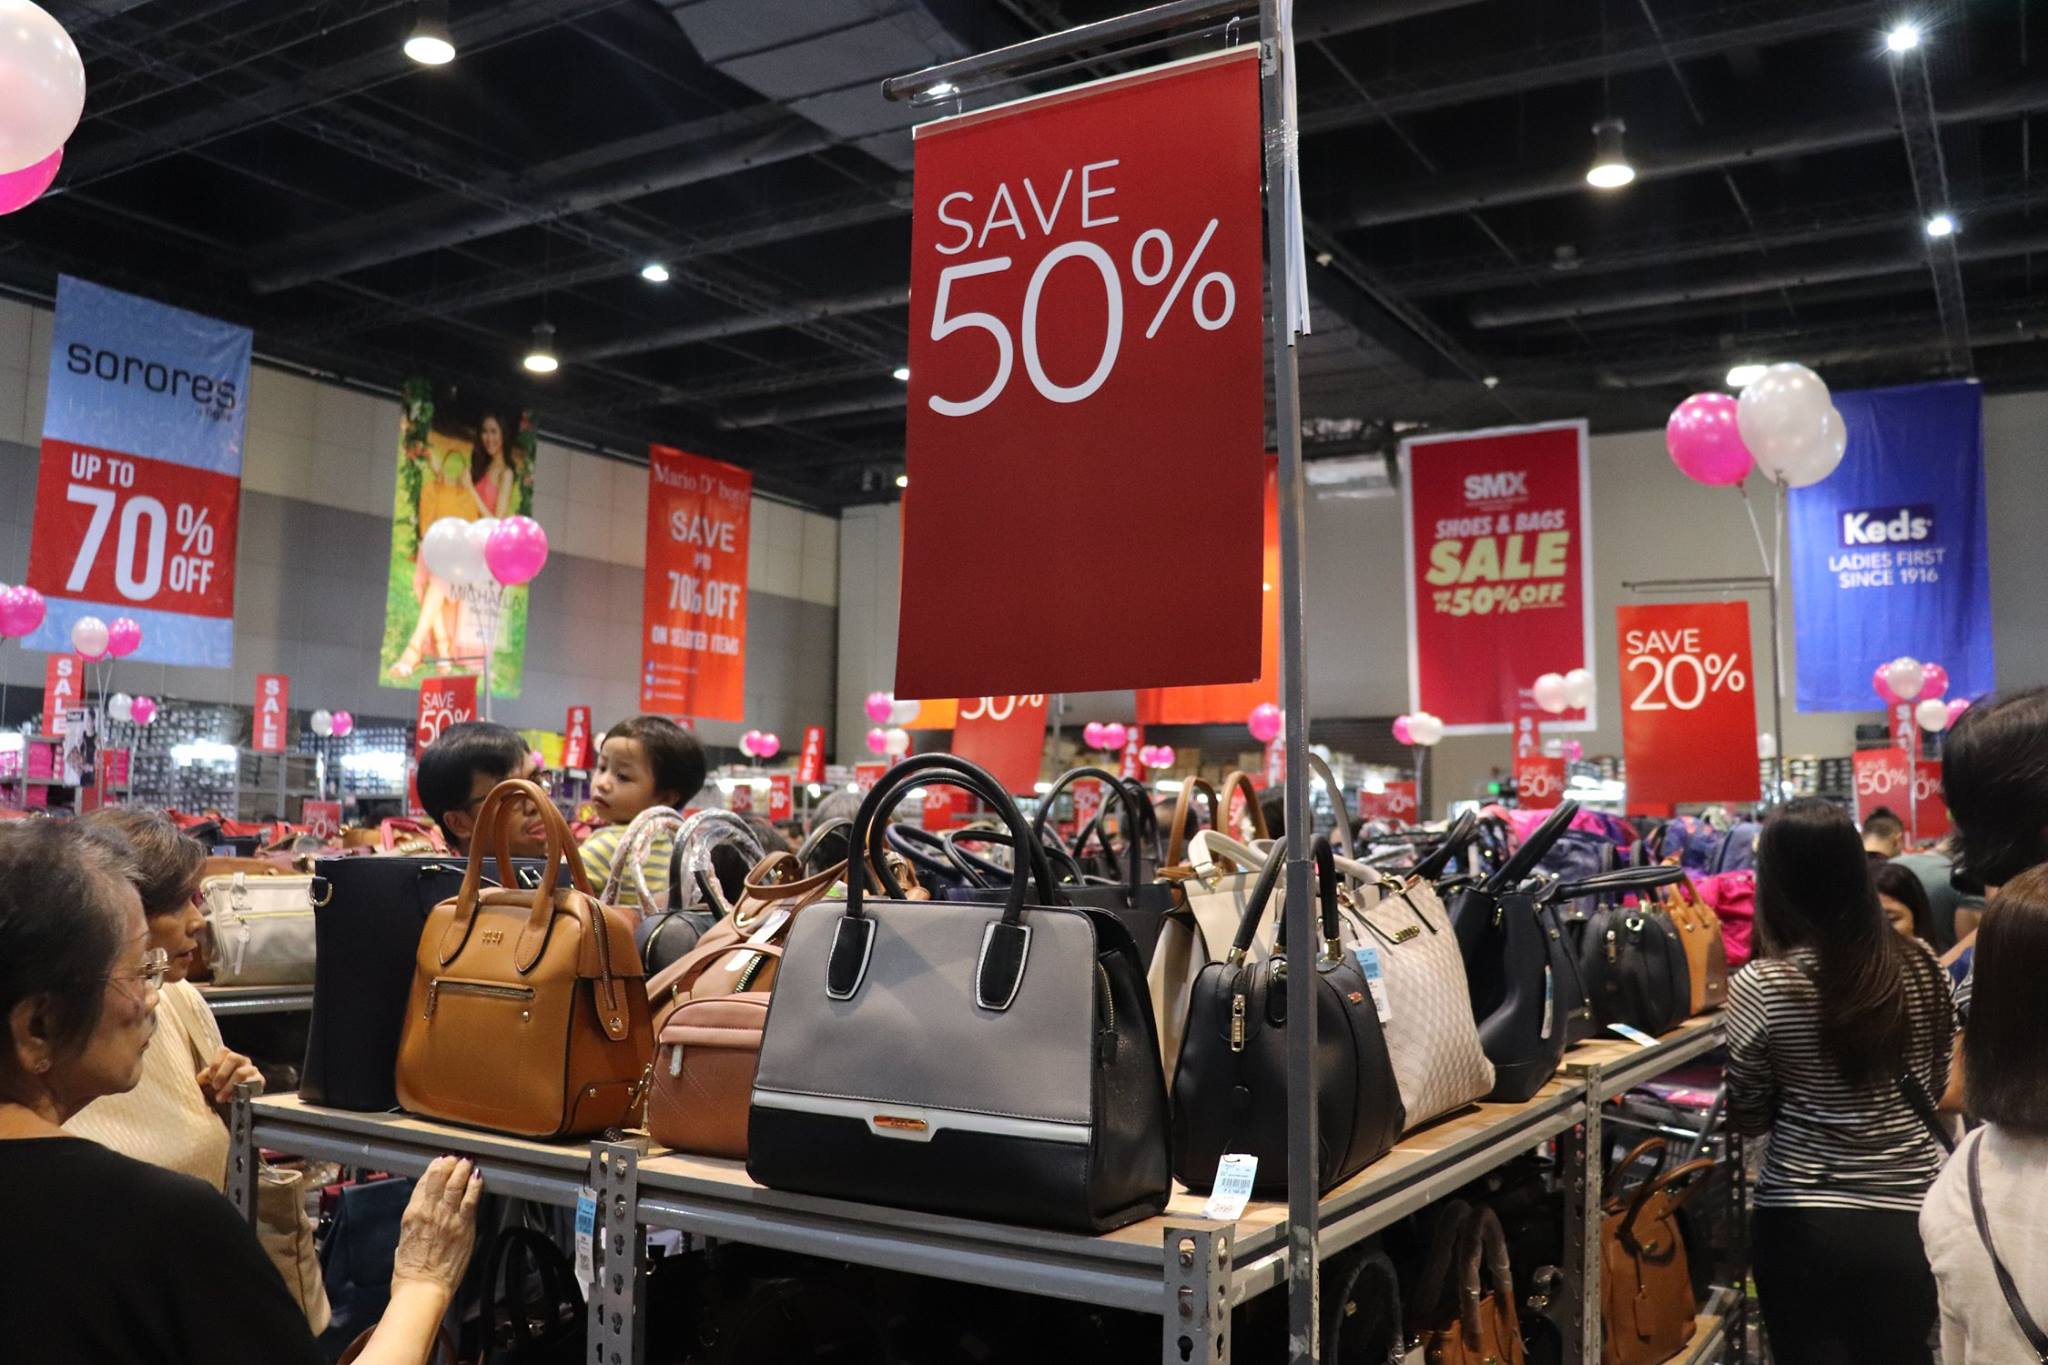 SMX Shoes and Bags Sale 2019